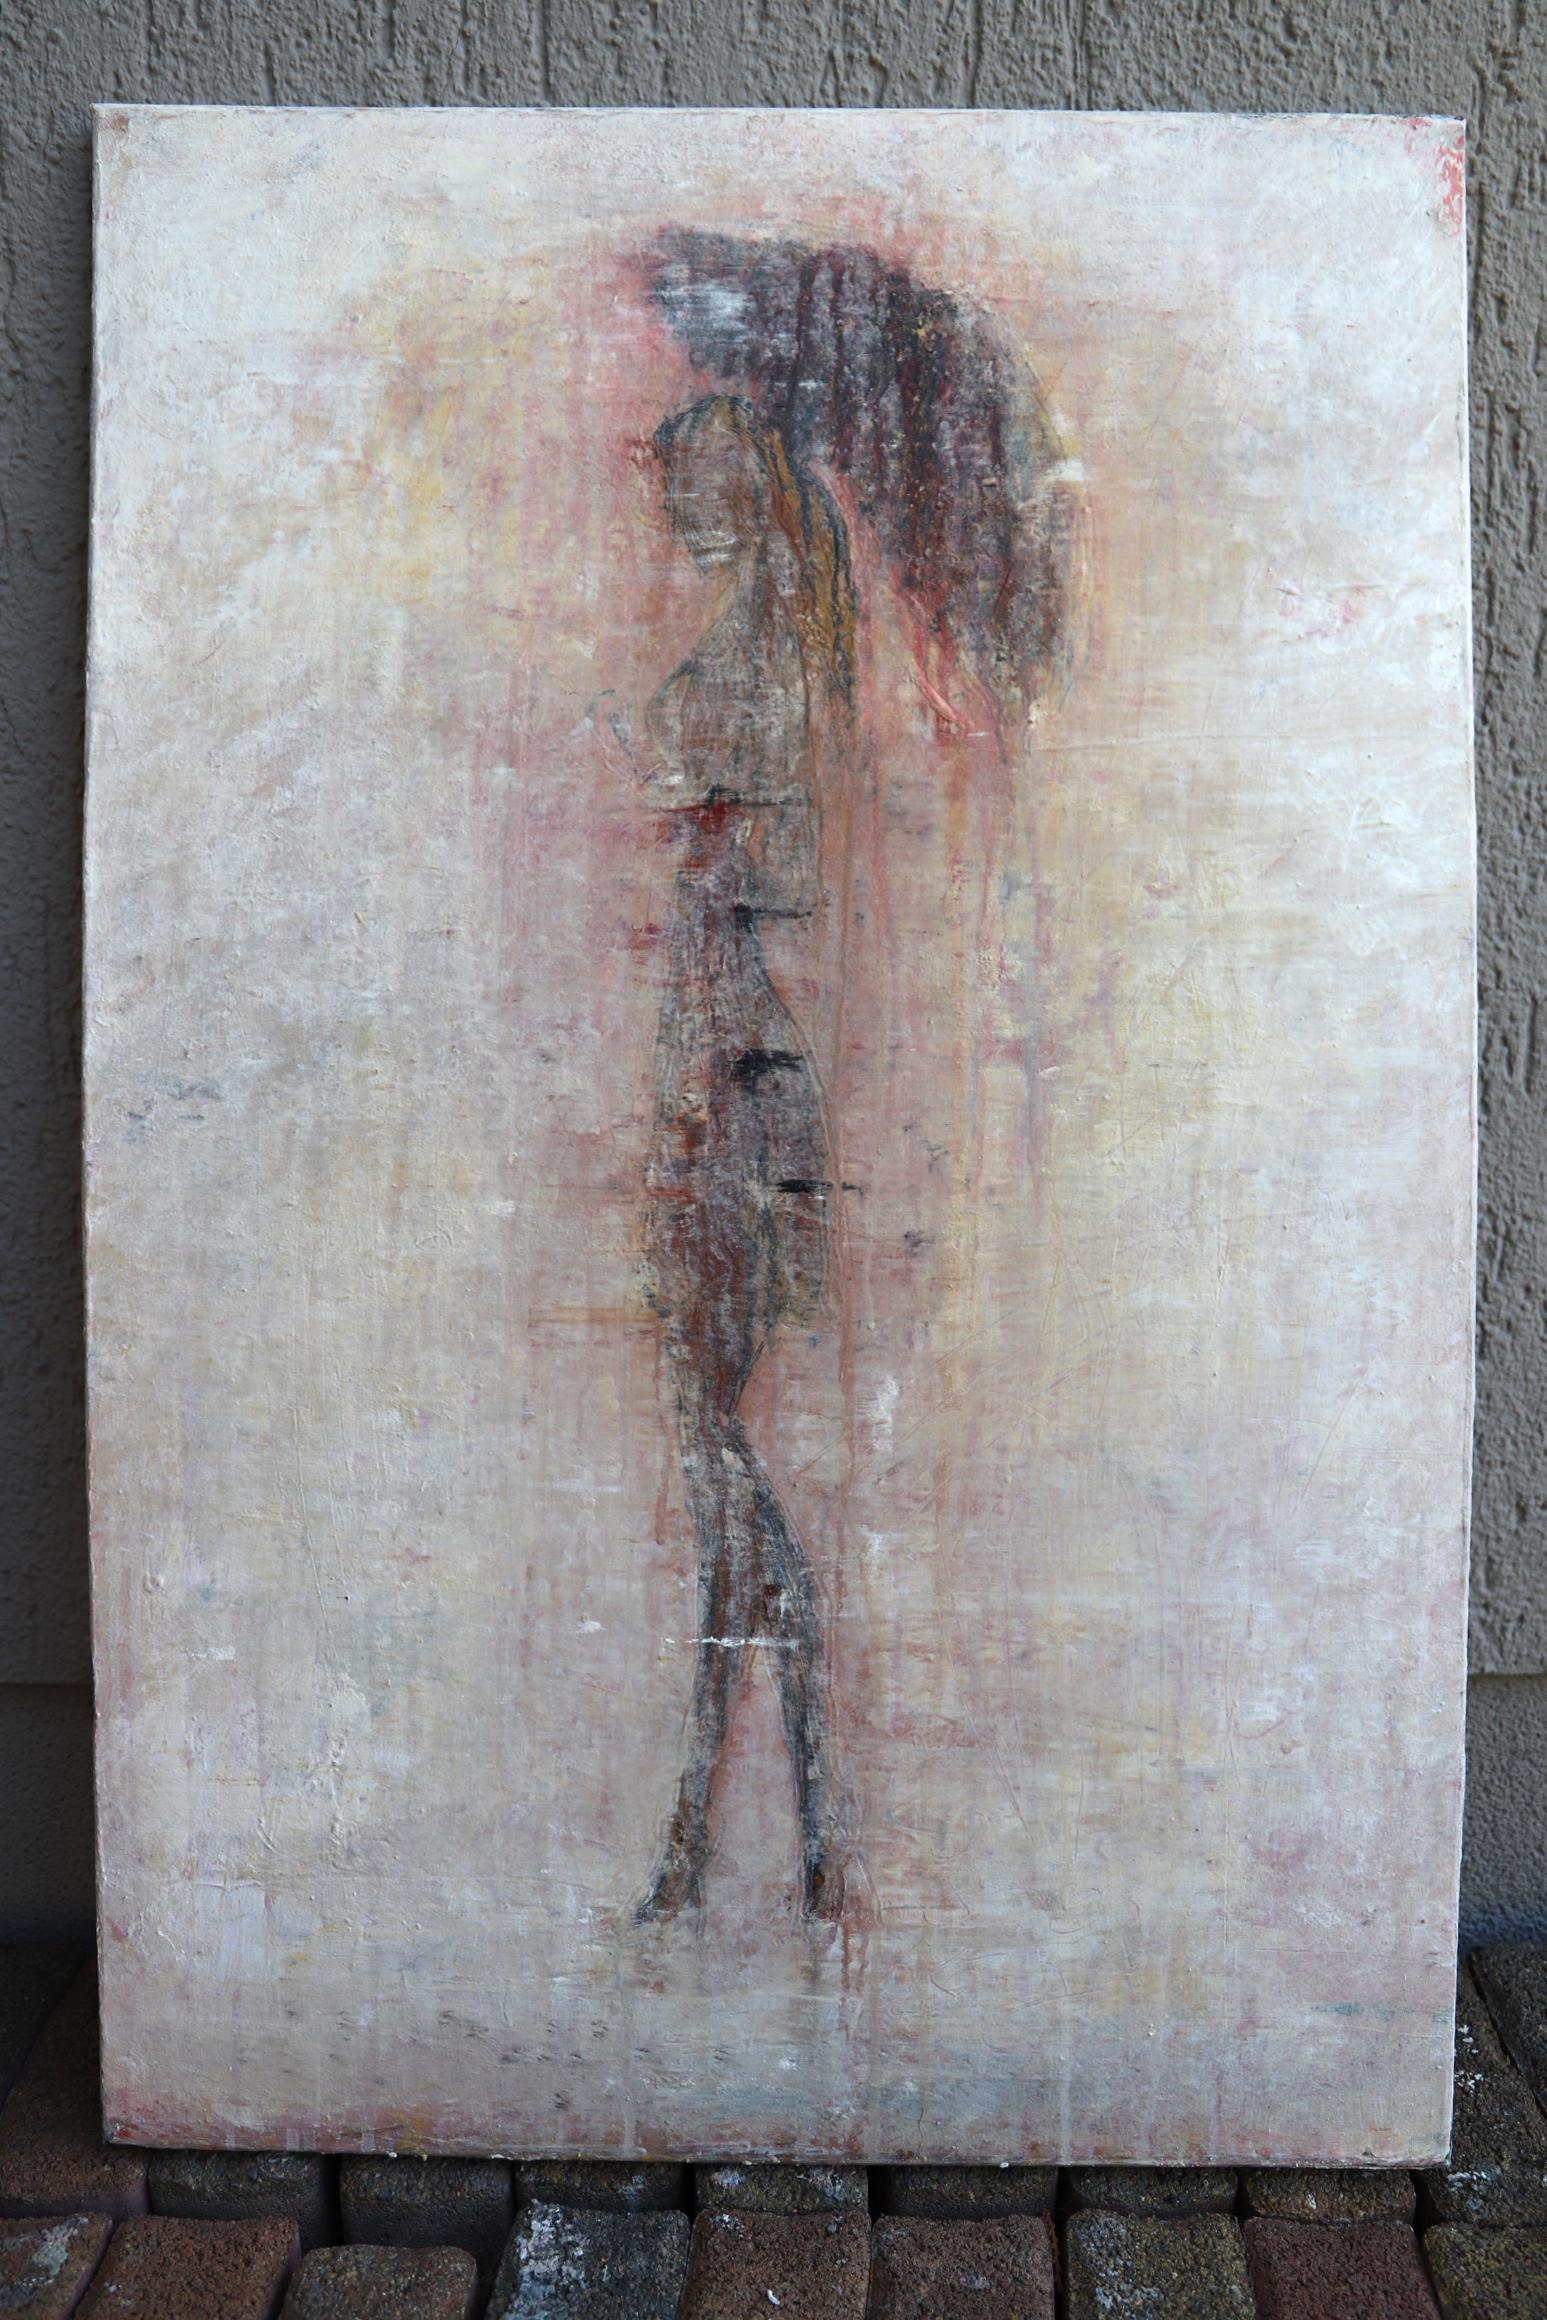 Artist: Roger König b. Dessau, Germany (1968) Master student of Kurt Schönburg, HWK Halle, Germany.
Art Awards Winner 2019 - Art Fair Leipzig
König combines modern painting with acrylic with old techniques and in this way, he connects contemporary